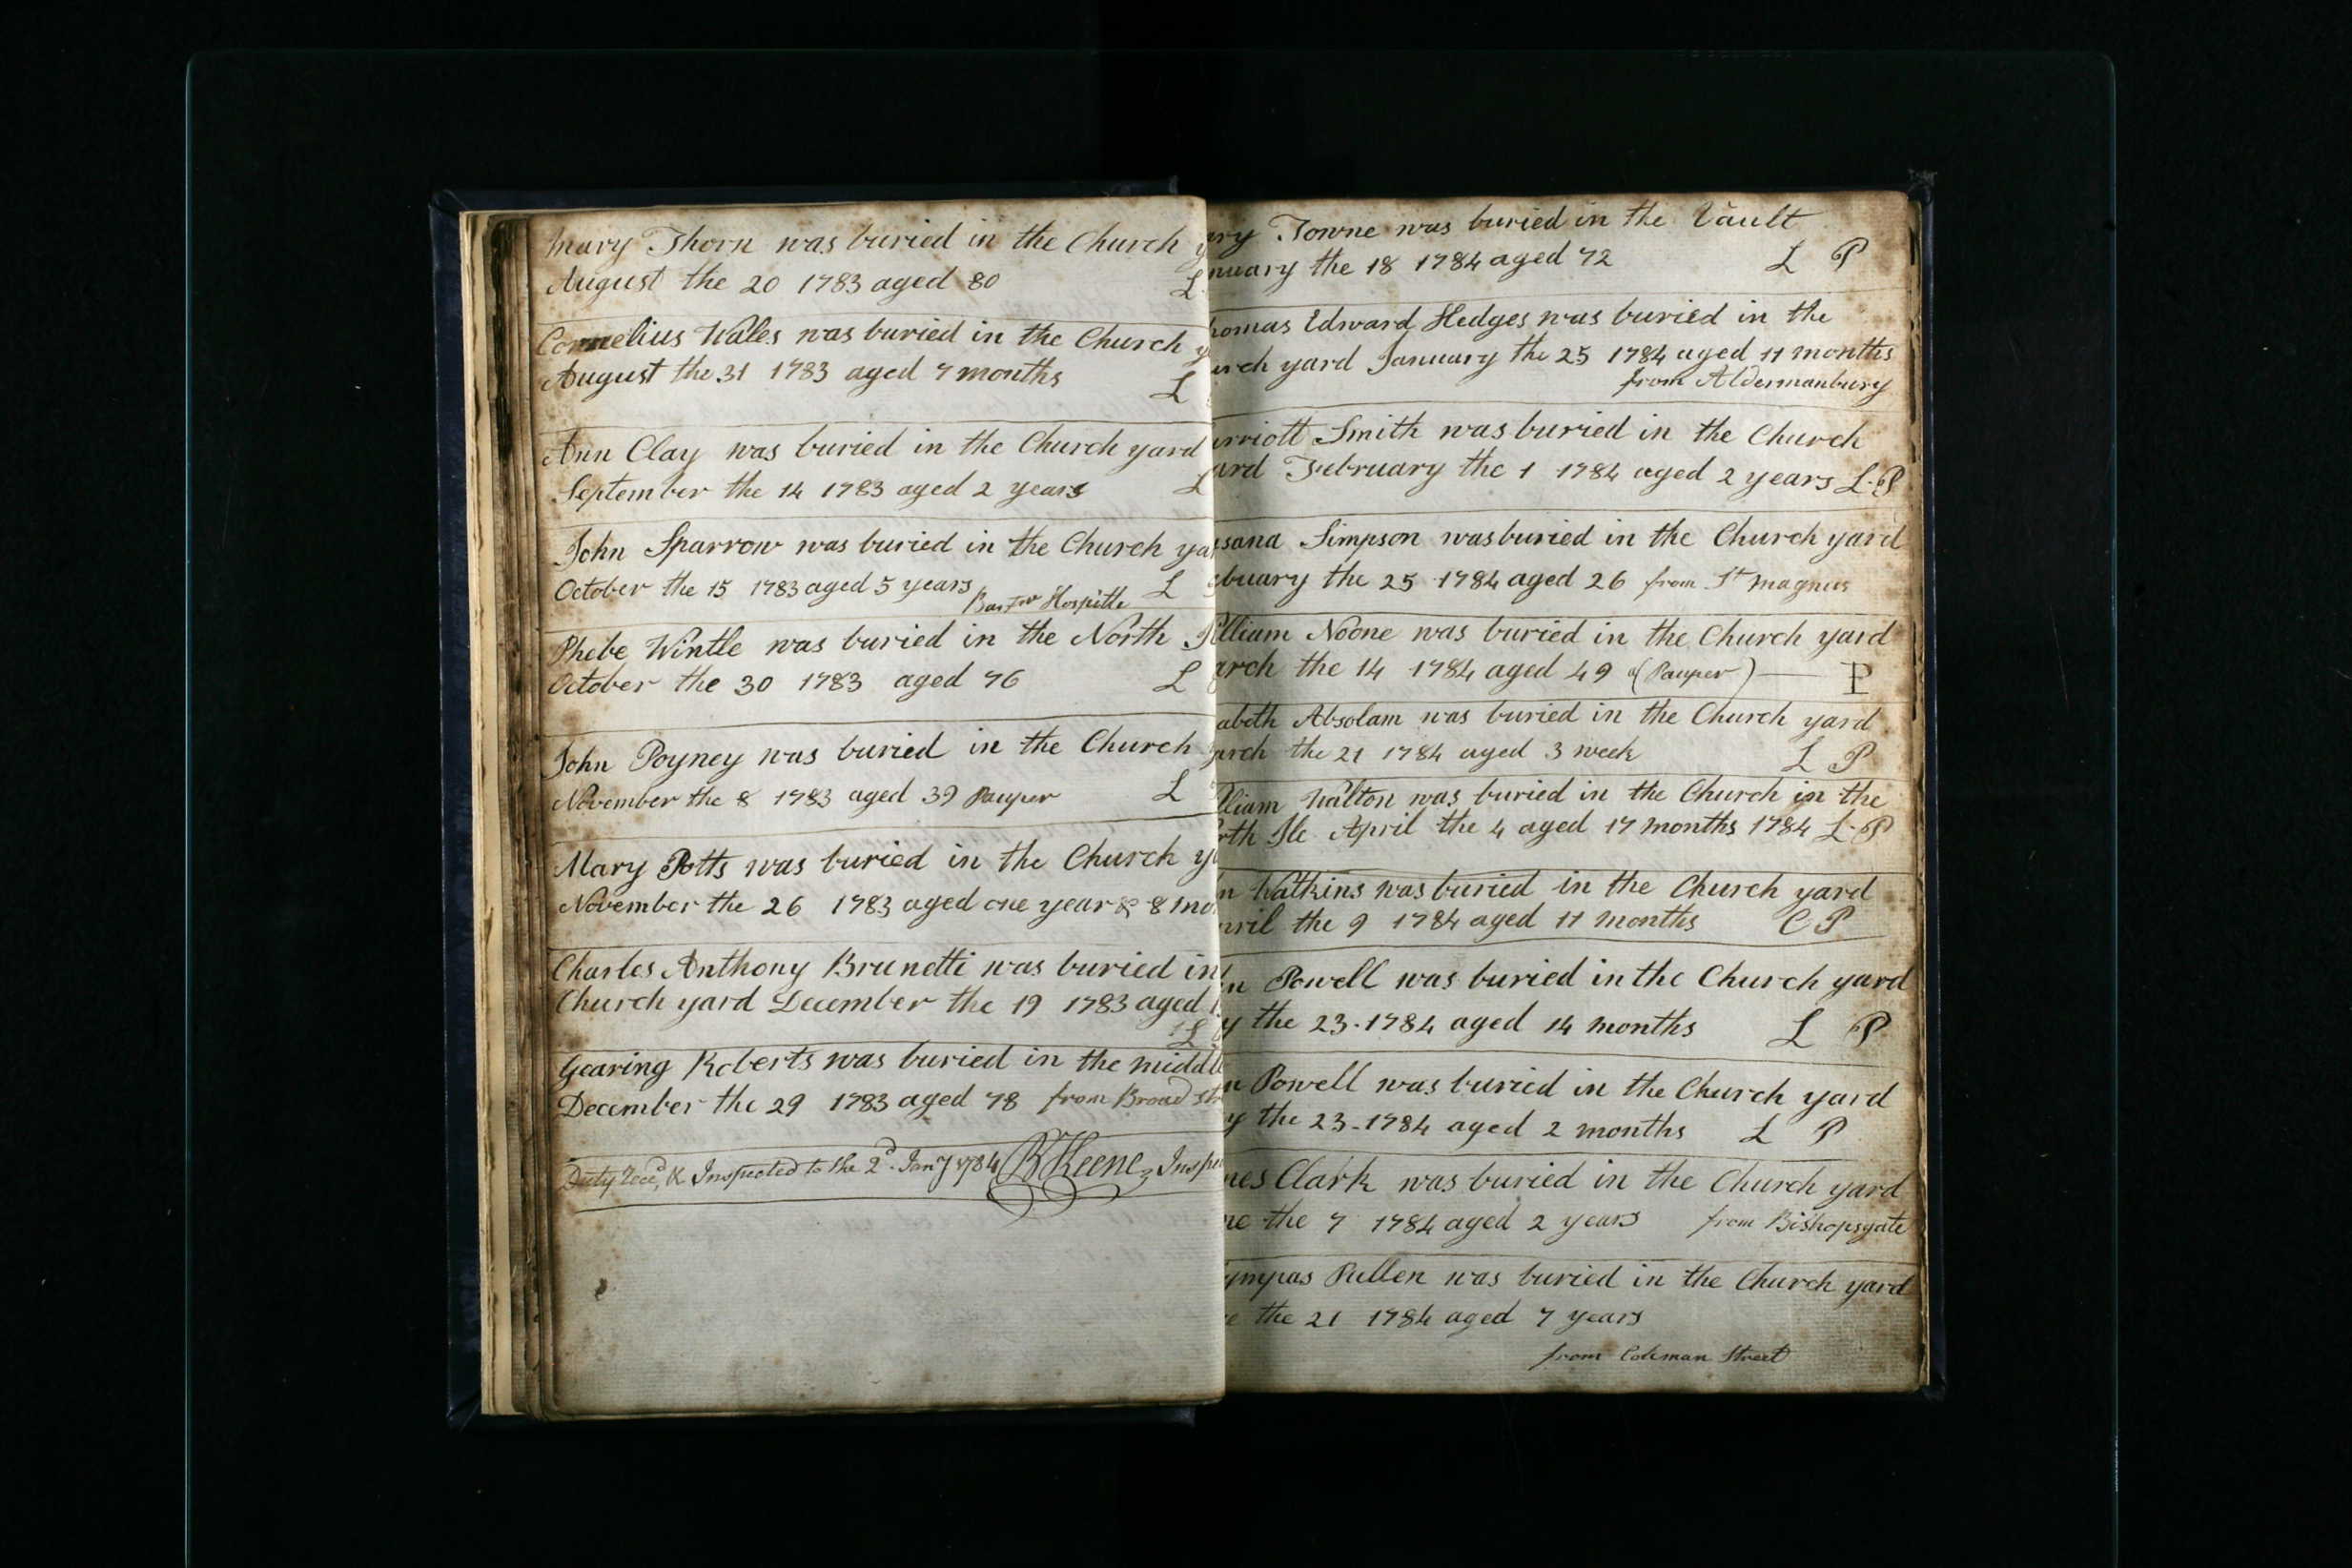 Gearing Roberts, mentioned in Simon Vertue’s 1742 will, burial record from 1783 aged 78.